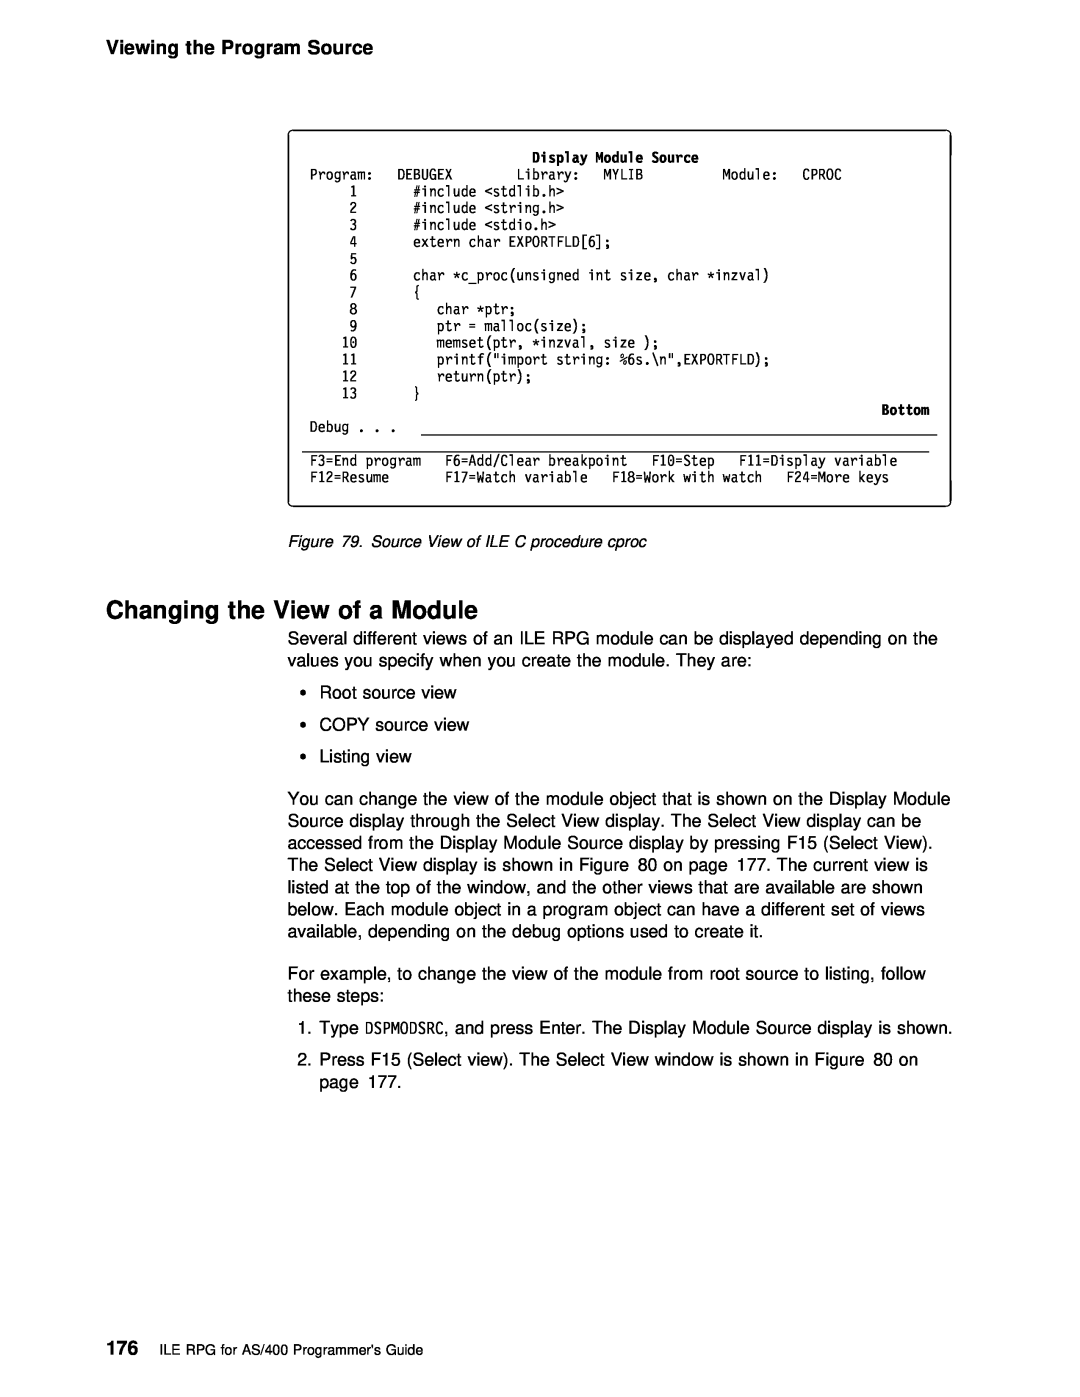 IBM AS/400 manual Changing the View of a, Module, Viewing the Program Source, Source View of ILE C procedure cproc 